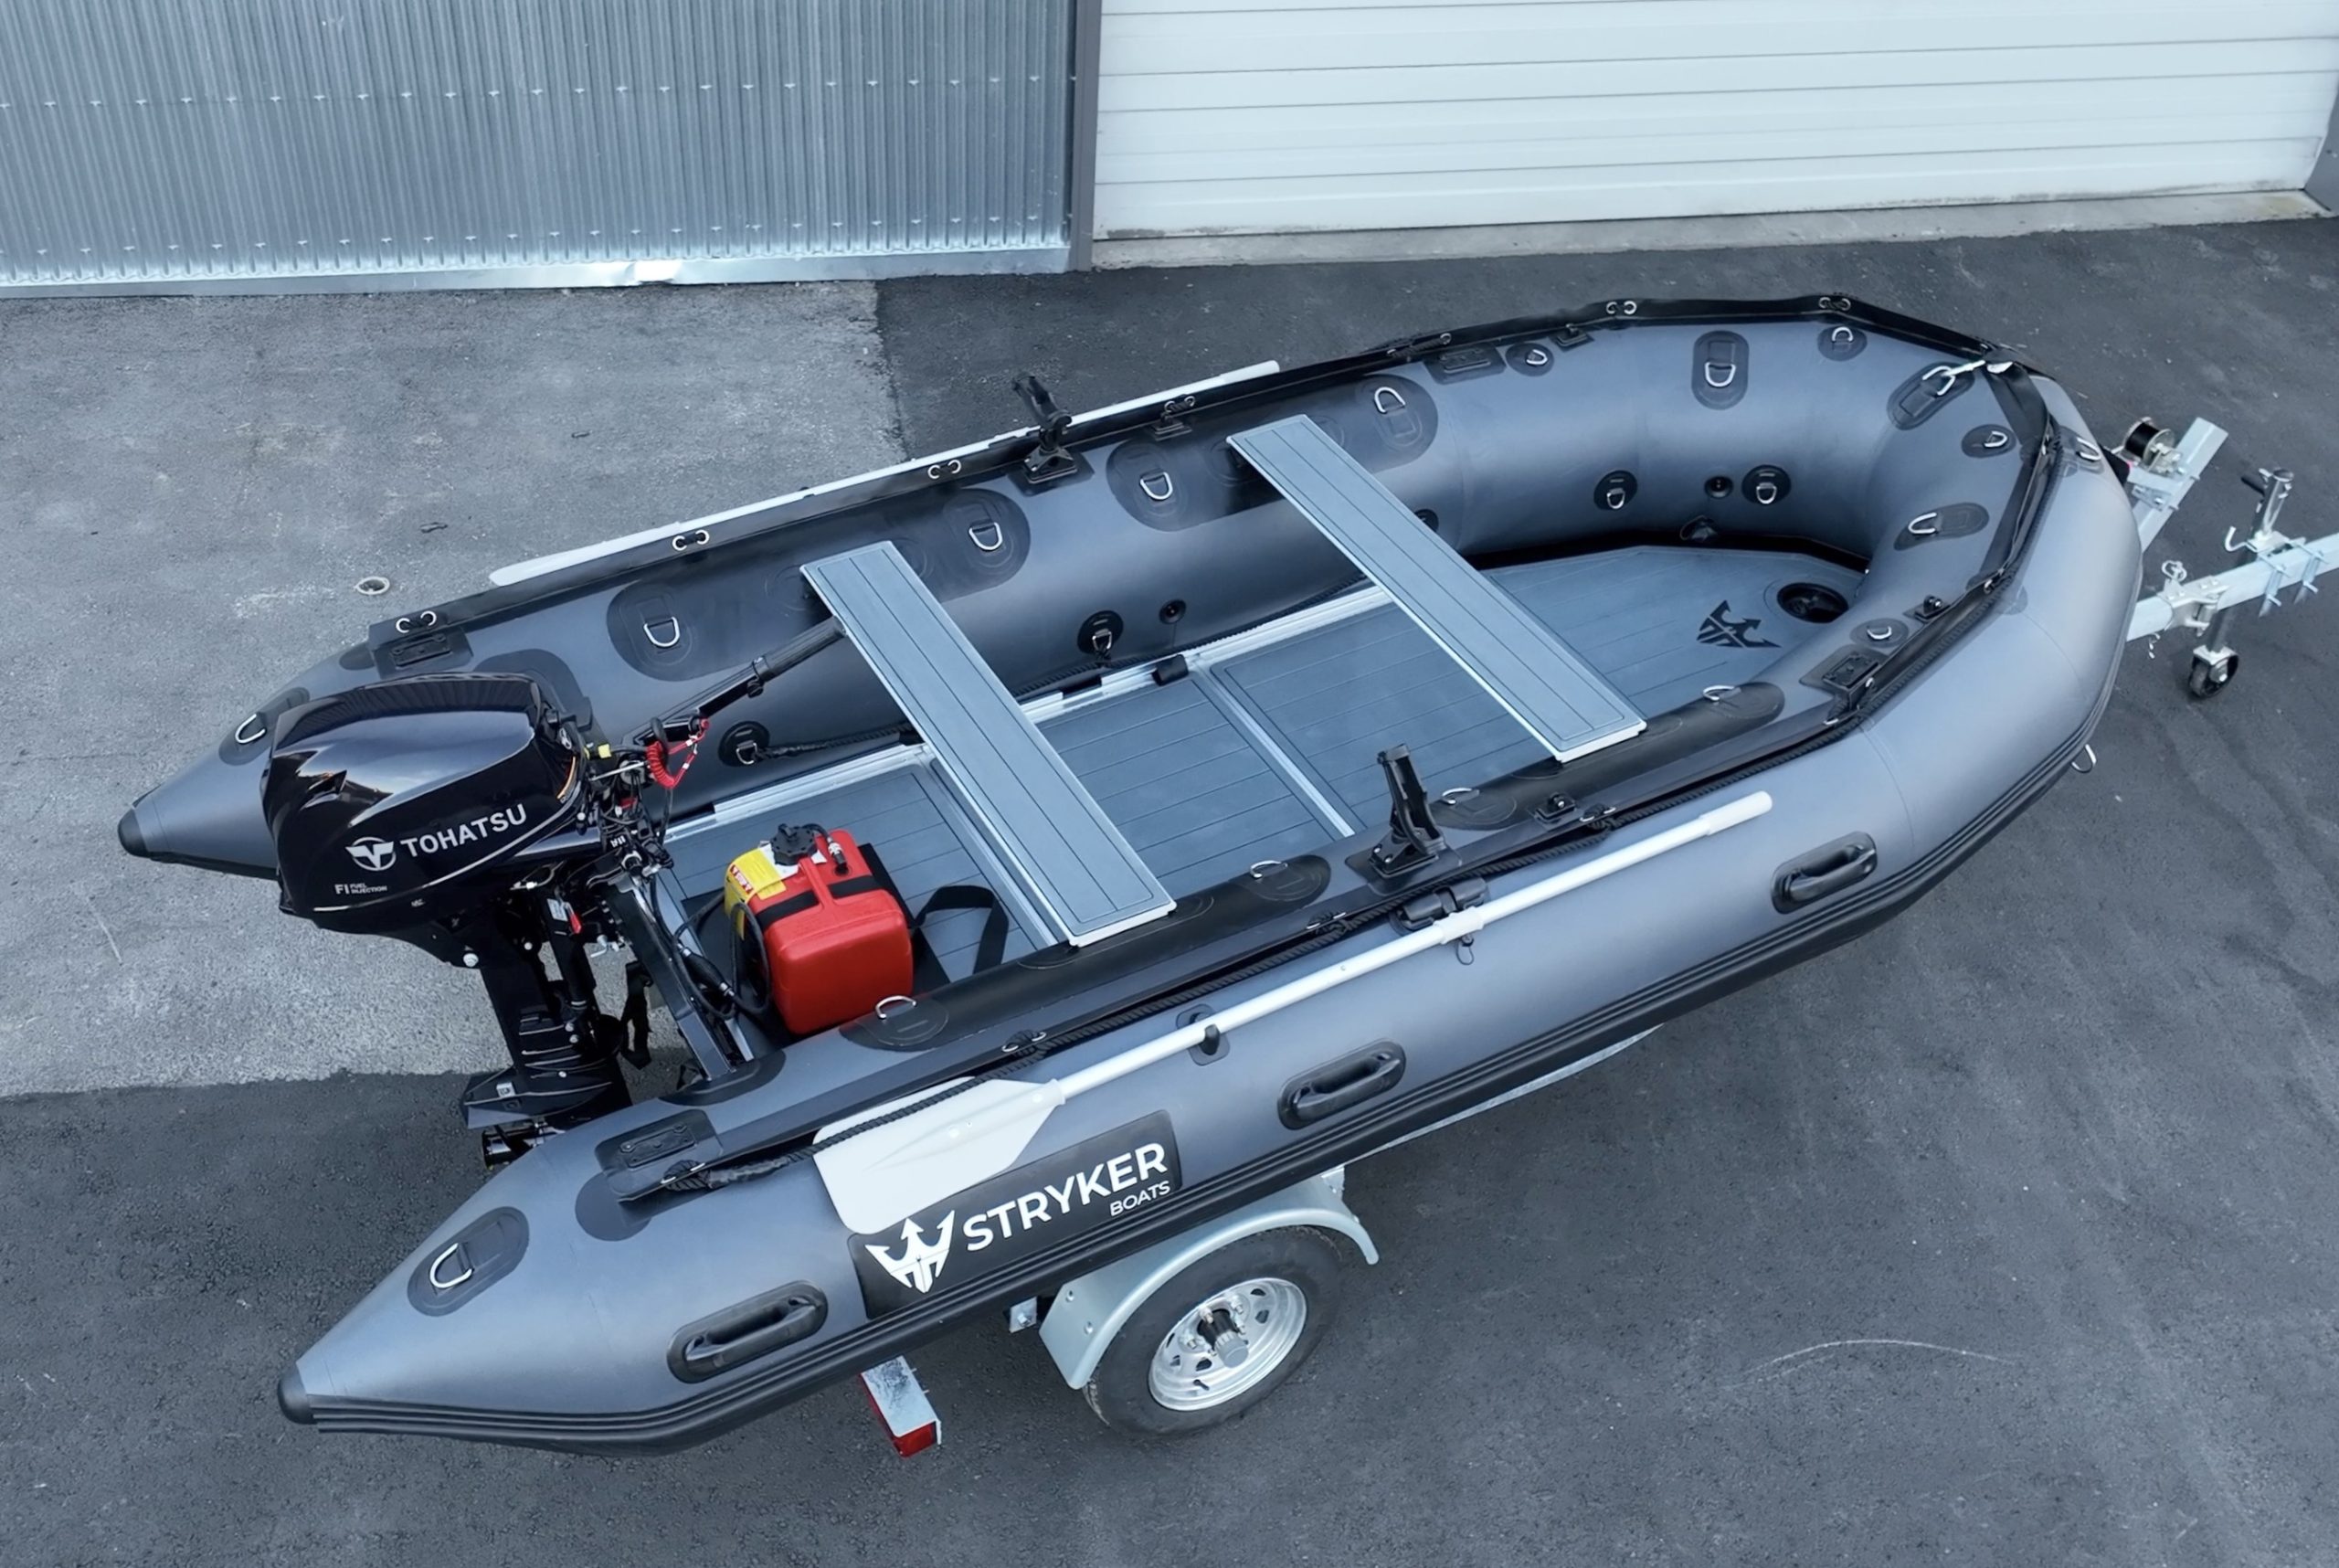 Stryker PRO 420 (13' 7”) Inflatable Boat